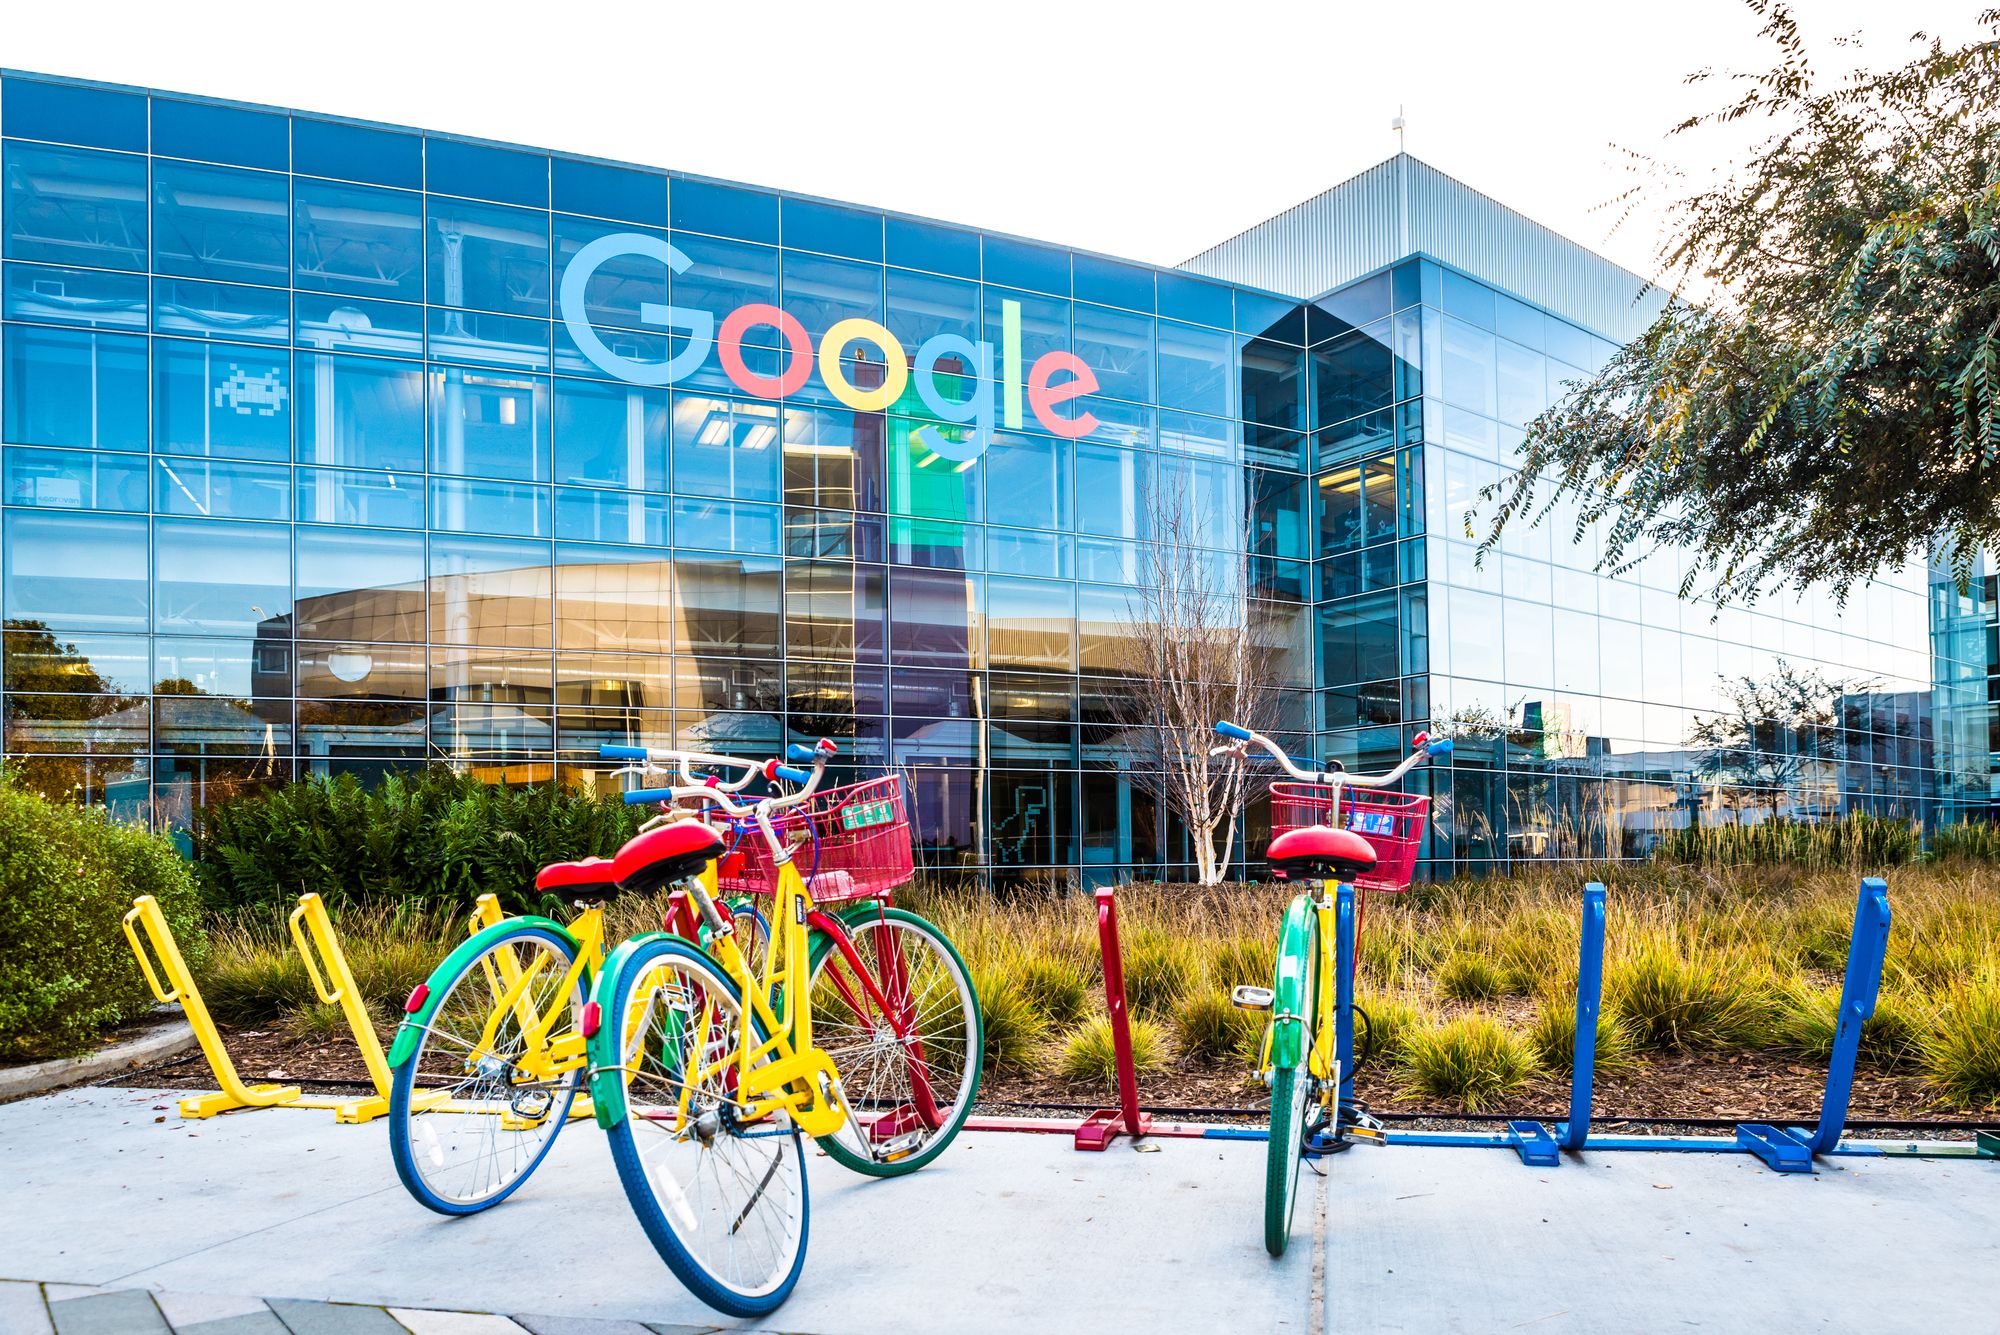 Mountain View, Ca USA December 29, 2016: Googleplex - Google Headquarters with biked on foreground